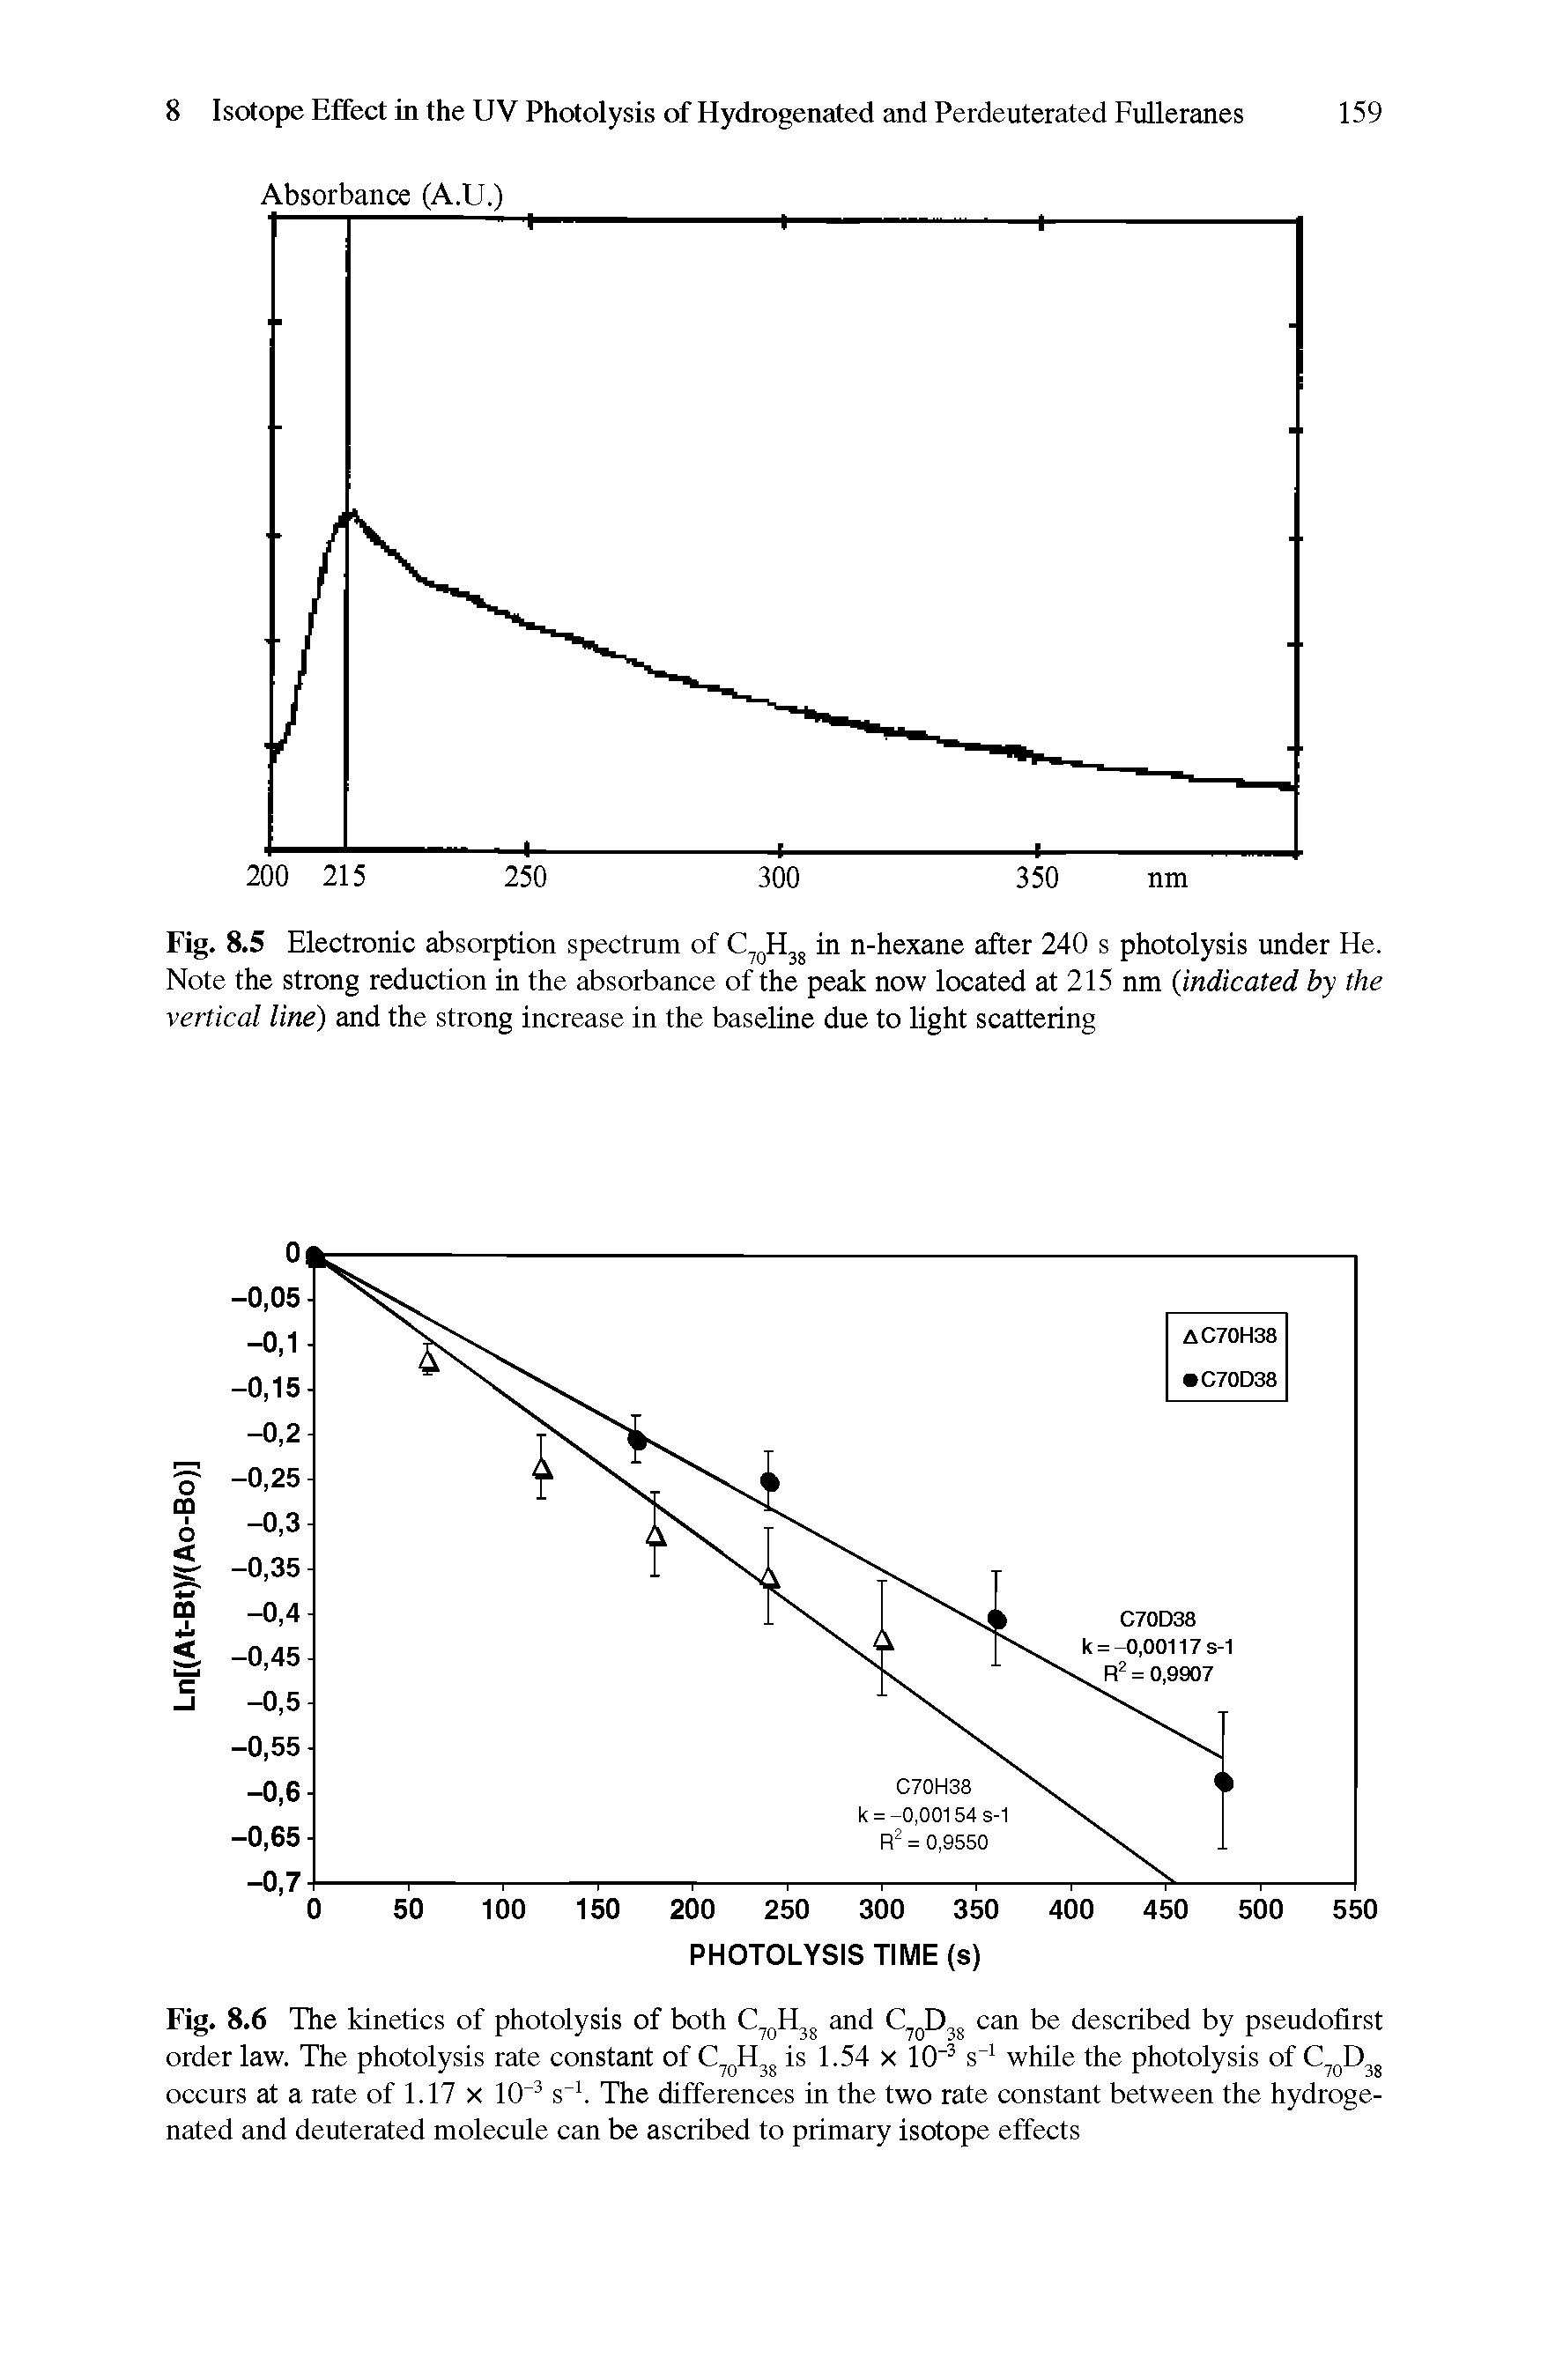 Fig. 8.6 The kinetics of photolysis of both C7QH38 and C70D38 can be described by pseudofirst order law. The photolysis rate constant of C7ffH38 is 1.54 x 10 3 s 1 while the photolysis of C7QD38 occurs at a rate of 1.17 x 10 3 s 1. The differences in the two rate constant between the hydrogenated and deuterated molecule can be ascribed to primary isotope effects...